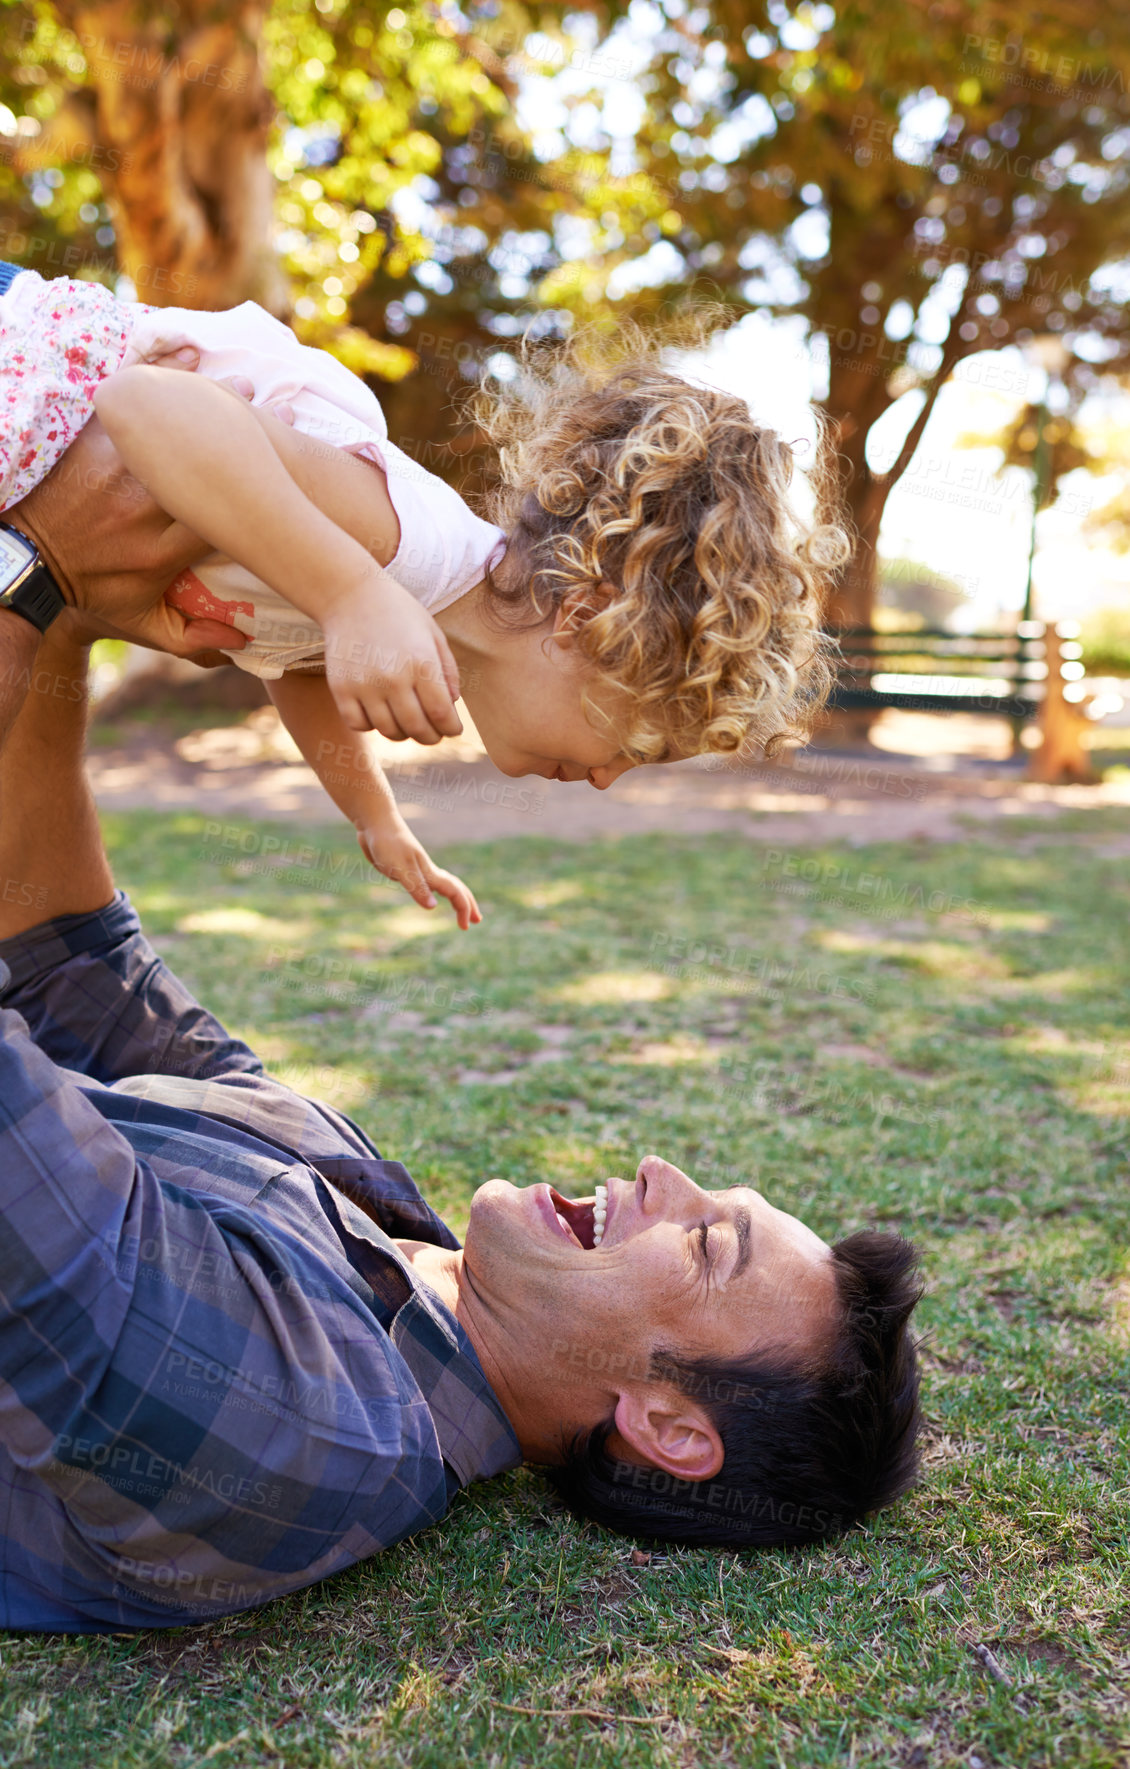 Buy stock photo Plane, father and daughter with playing in park on grass for fun game, bonding and healthy relationship with energy. Happy family, man or girl child with airplane, childhood fantasy or flying outdoor